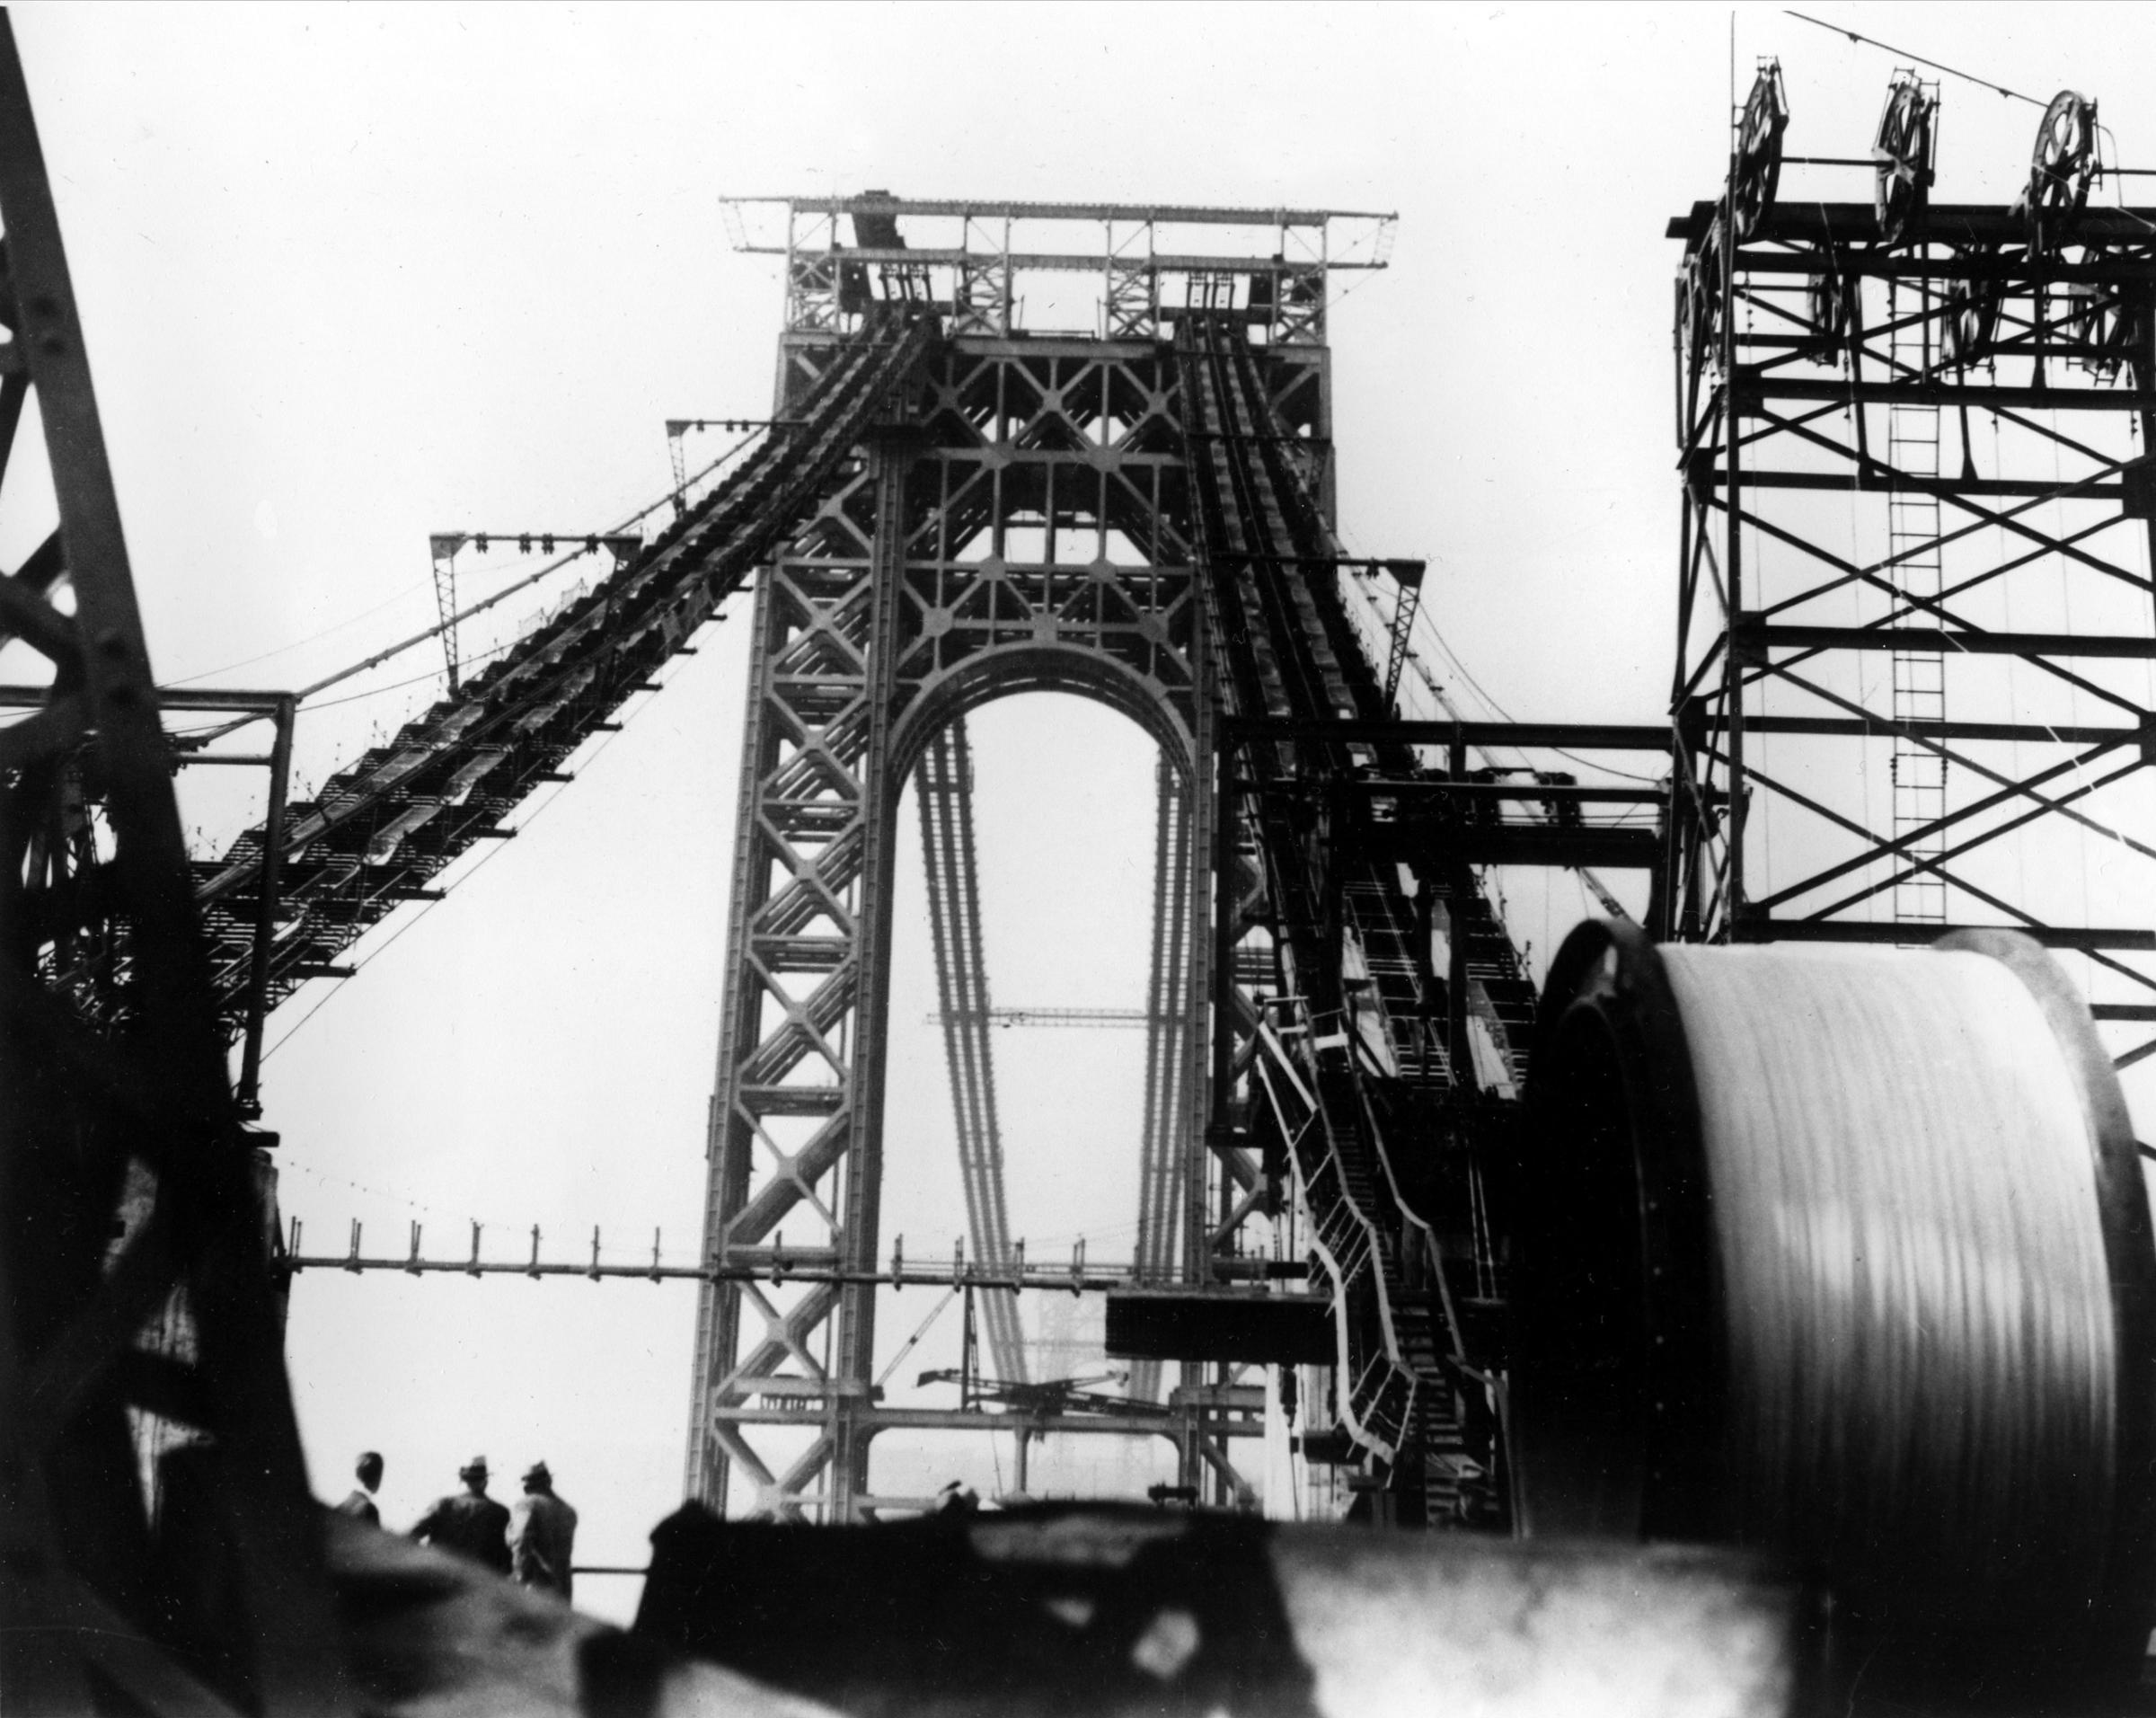 The main cable of the George Washington Bridge is being layed as construction of the suspension bridge connecting New York and New Jersey continues on Oct. 23, 1929.